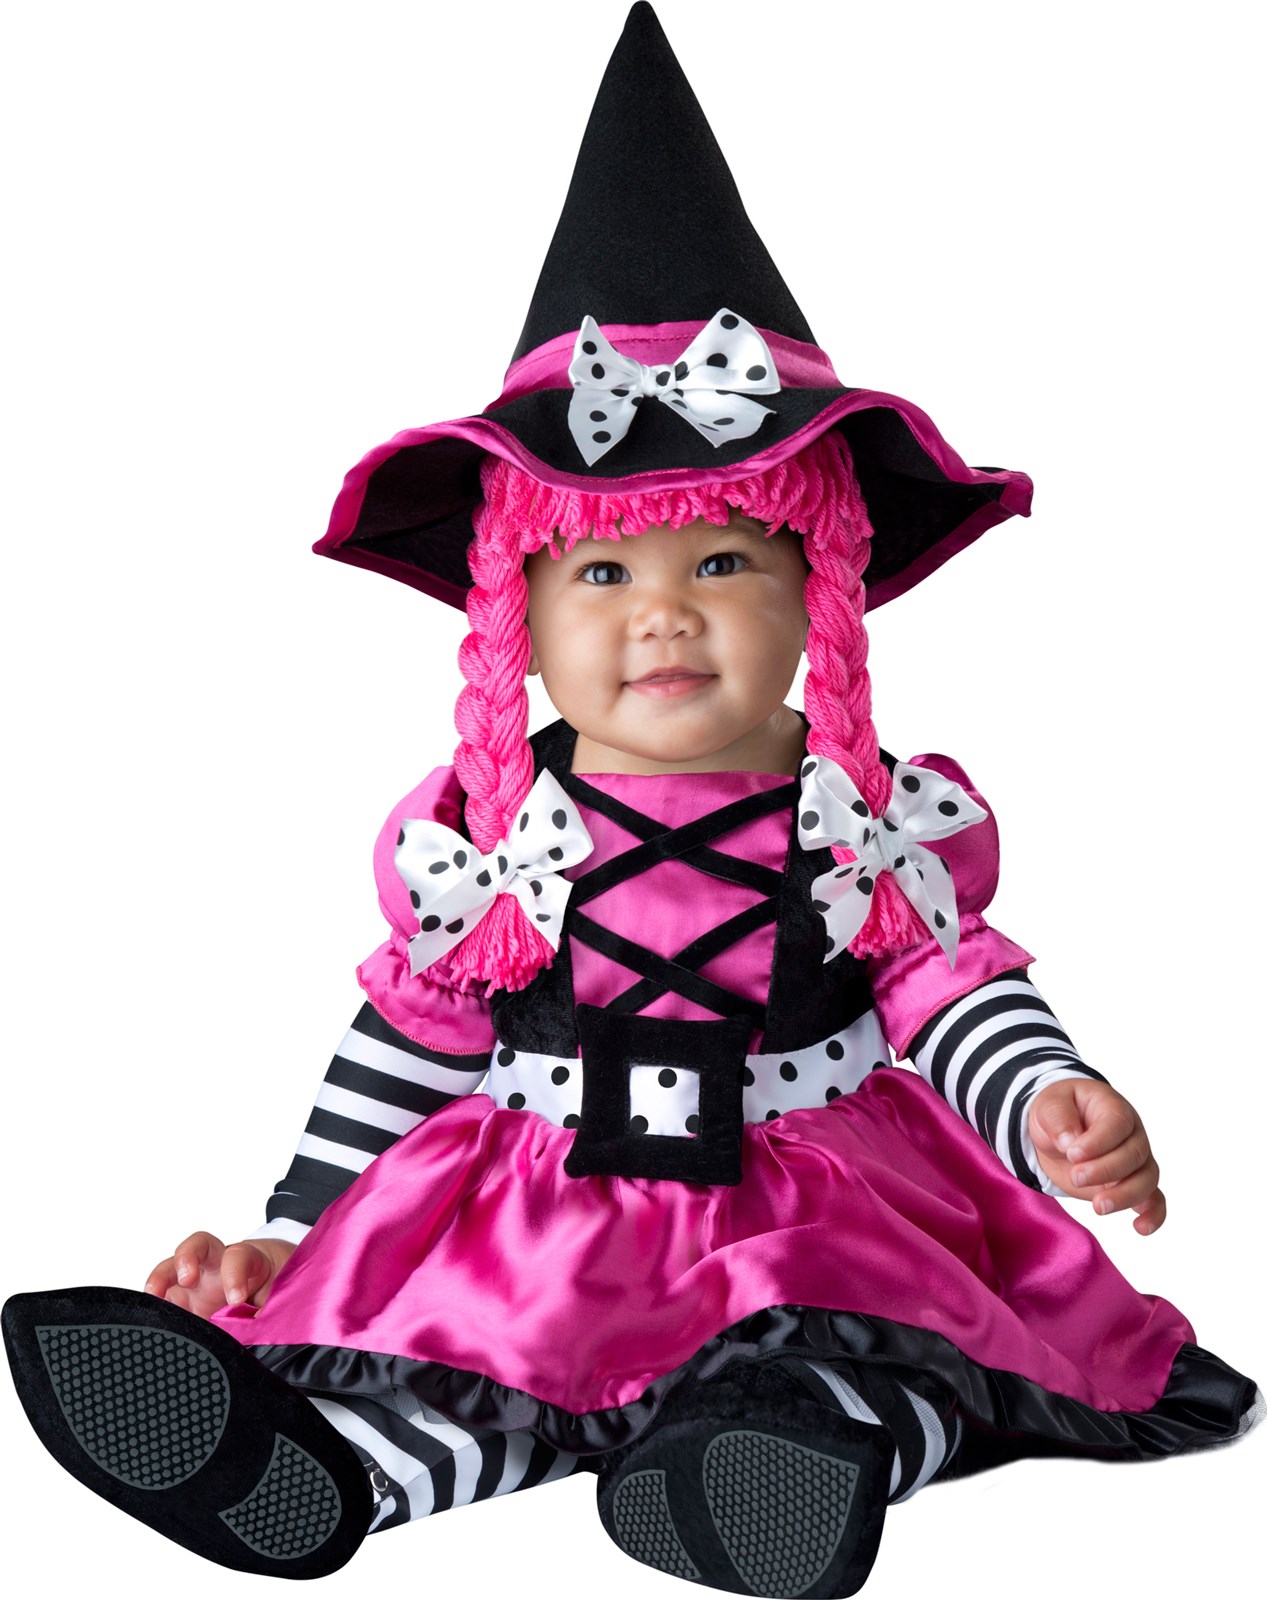 Wee Witch Costume For Toddlers